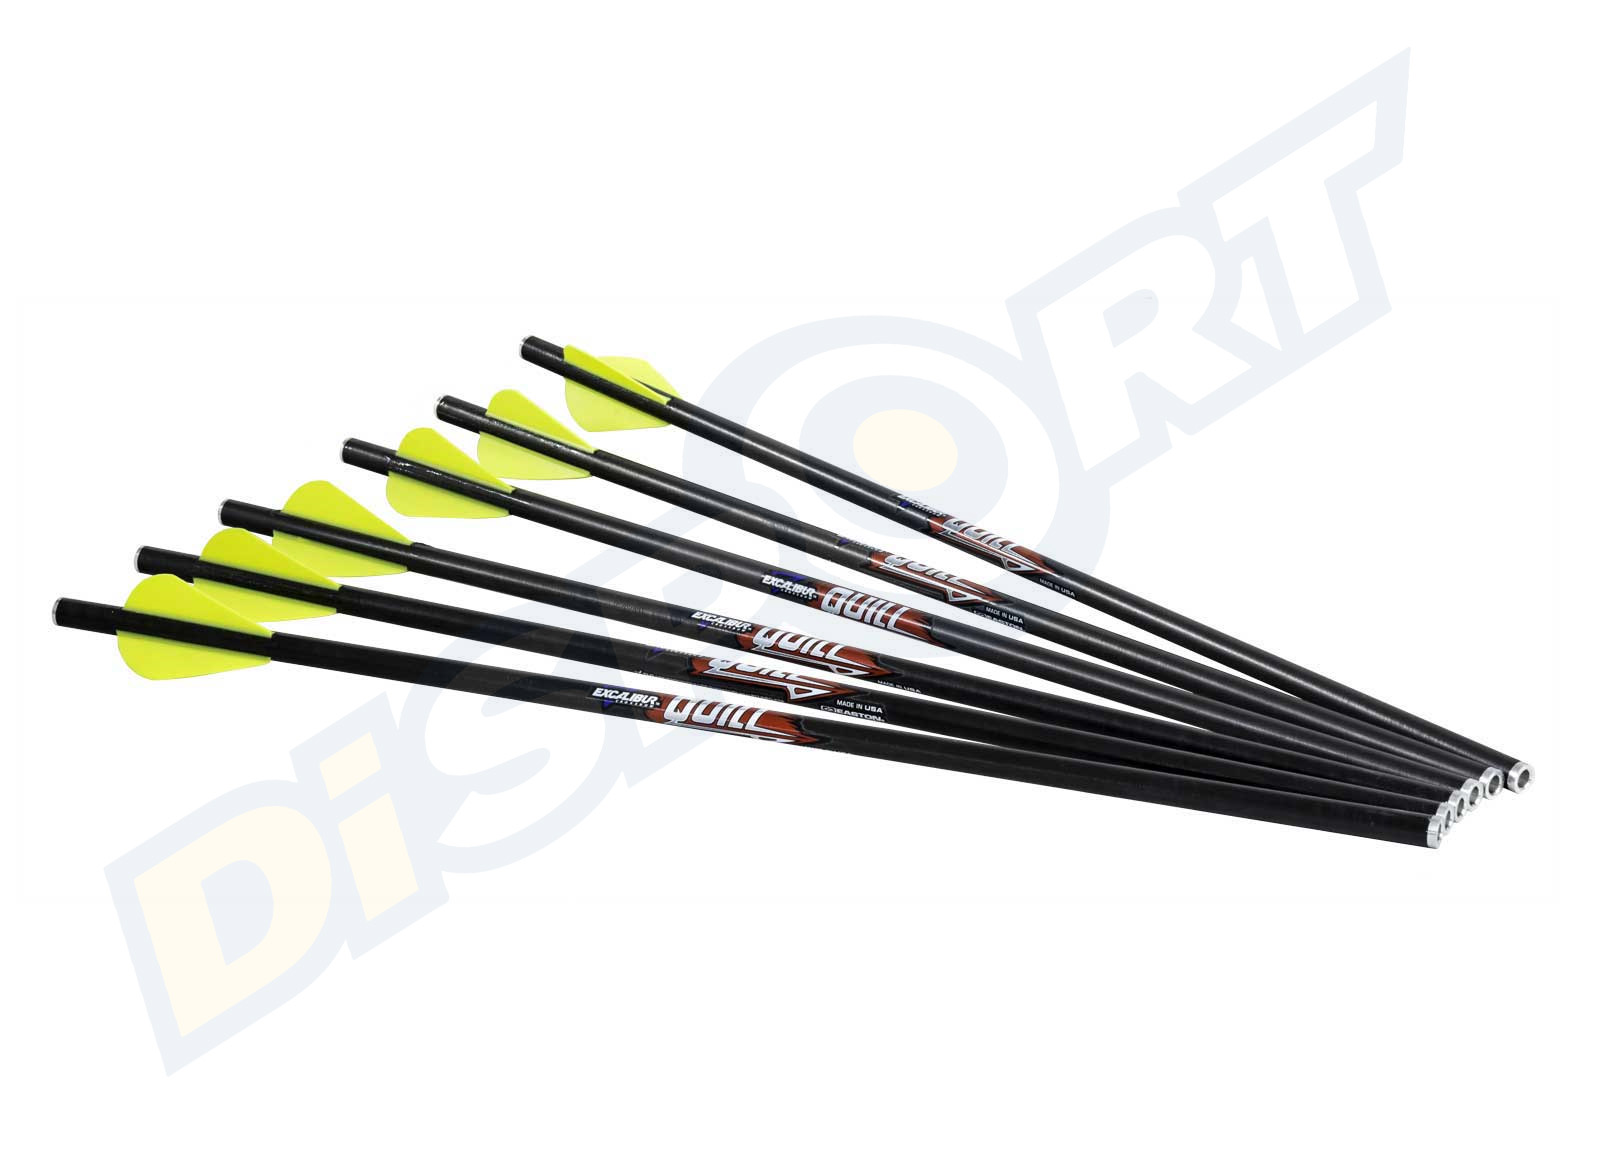 EXCALIBUR CARBON QUILL 16.5'' CROSSBOW ARROW 6 PIECES PACK